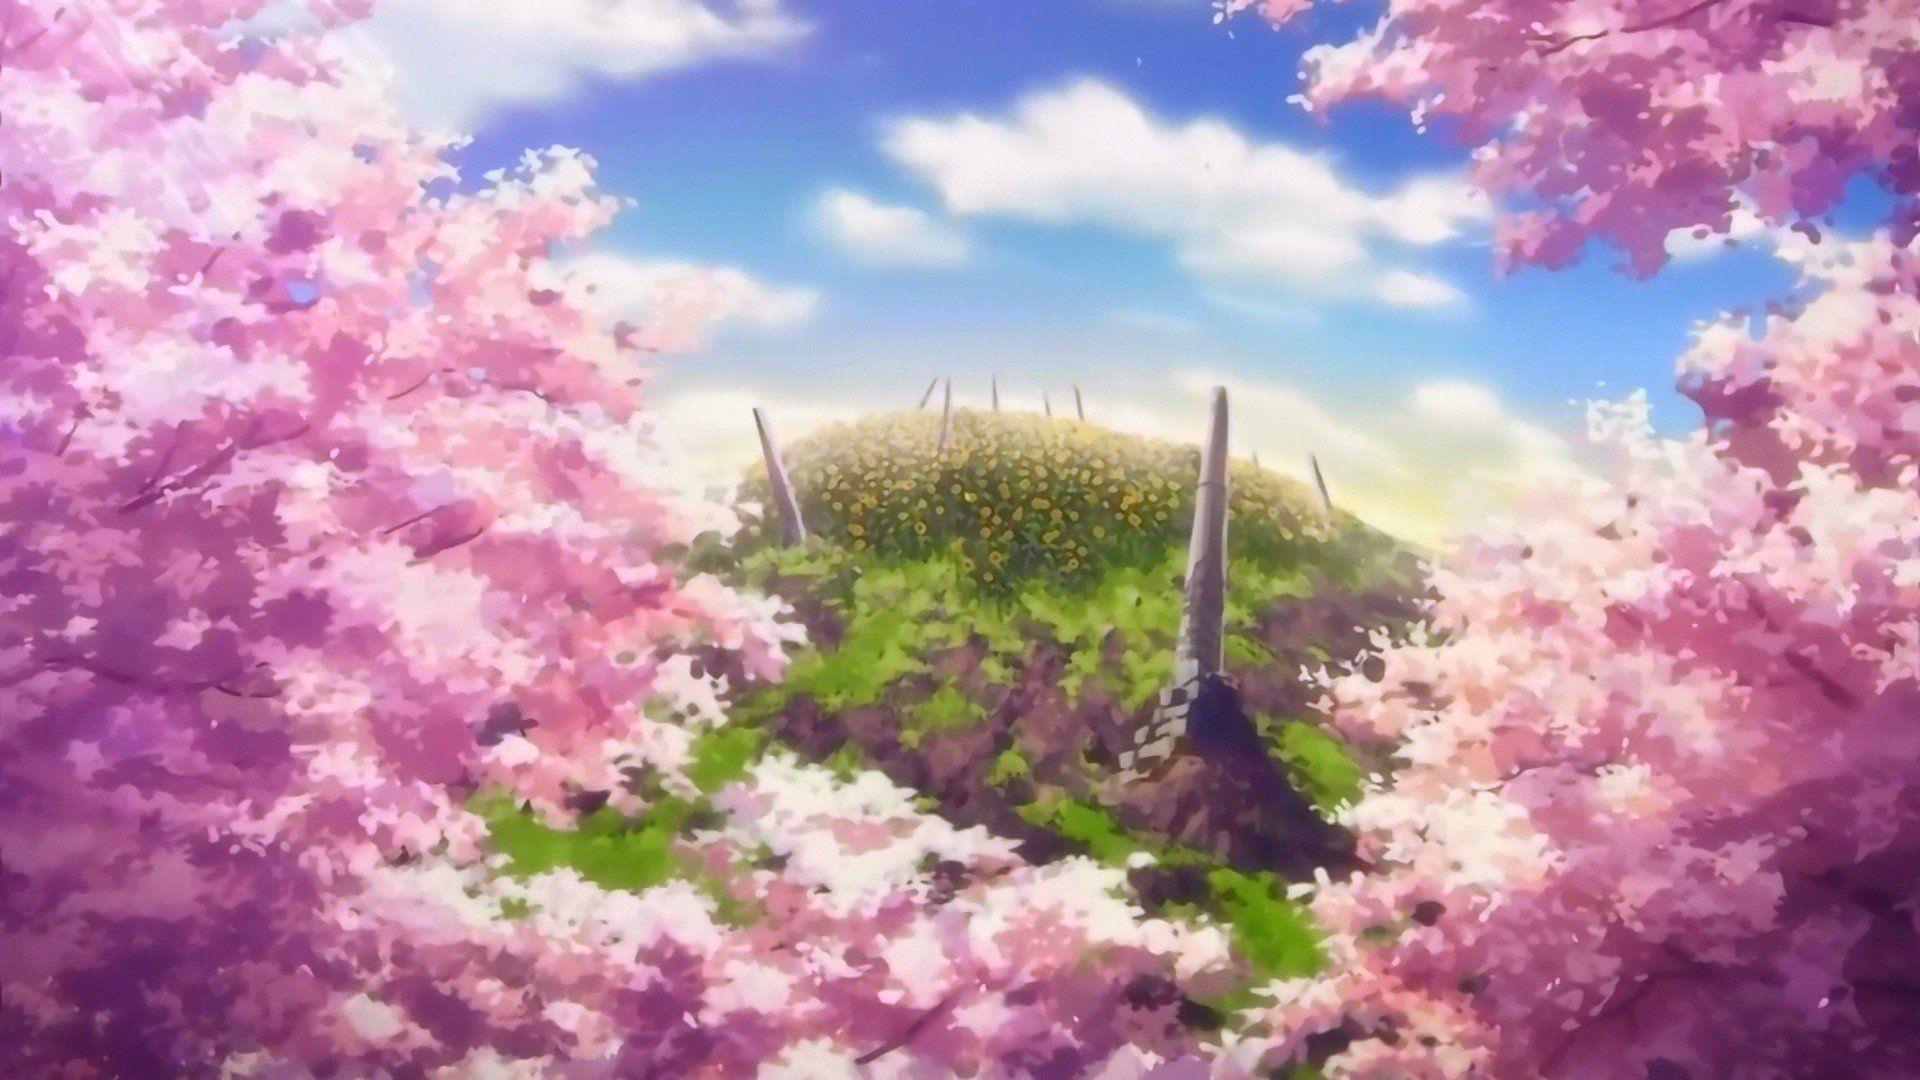 An Anime Sakura Plant And Cherry Blossoms Powerpoint Background For Free  Download - Slidesdocs